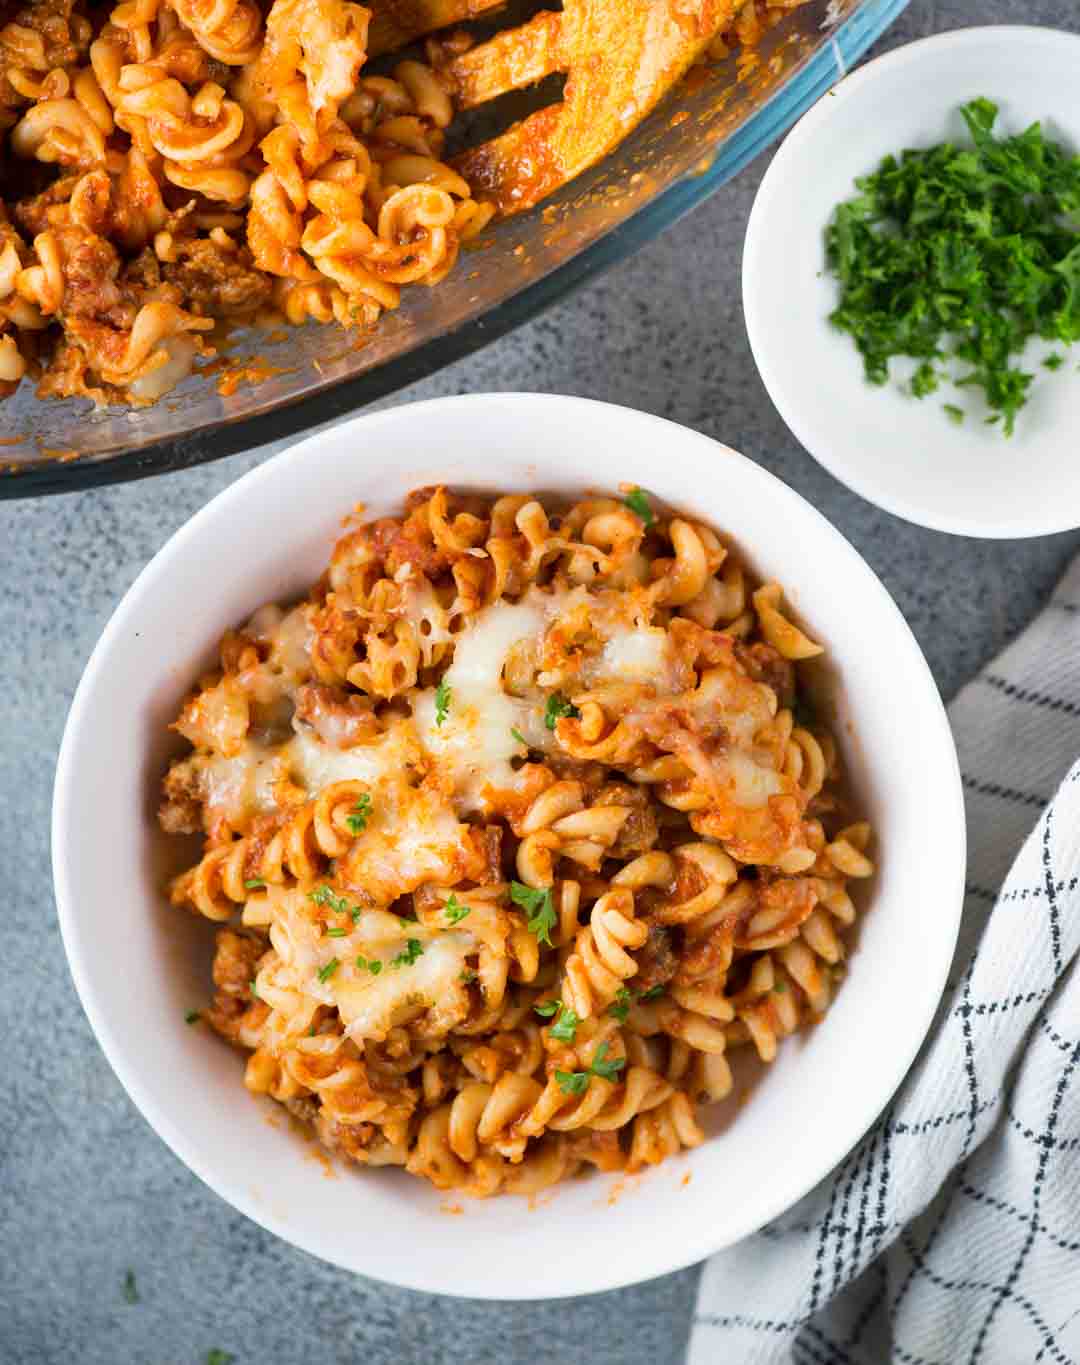 Chessy Pasta Bake With Sausage - The flavours of kitchen